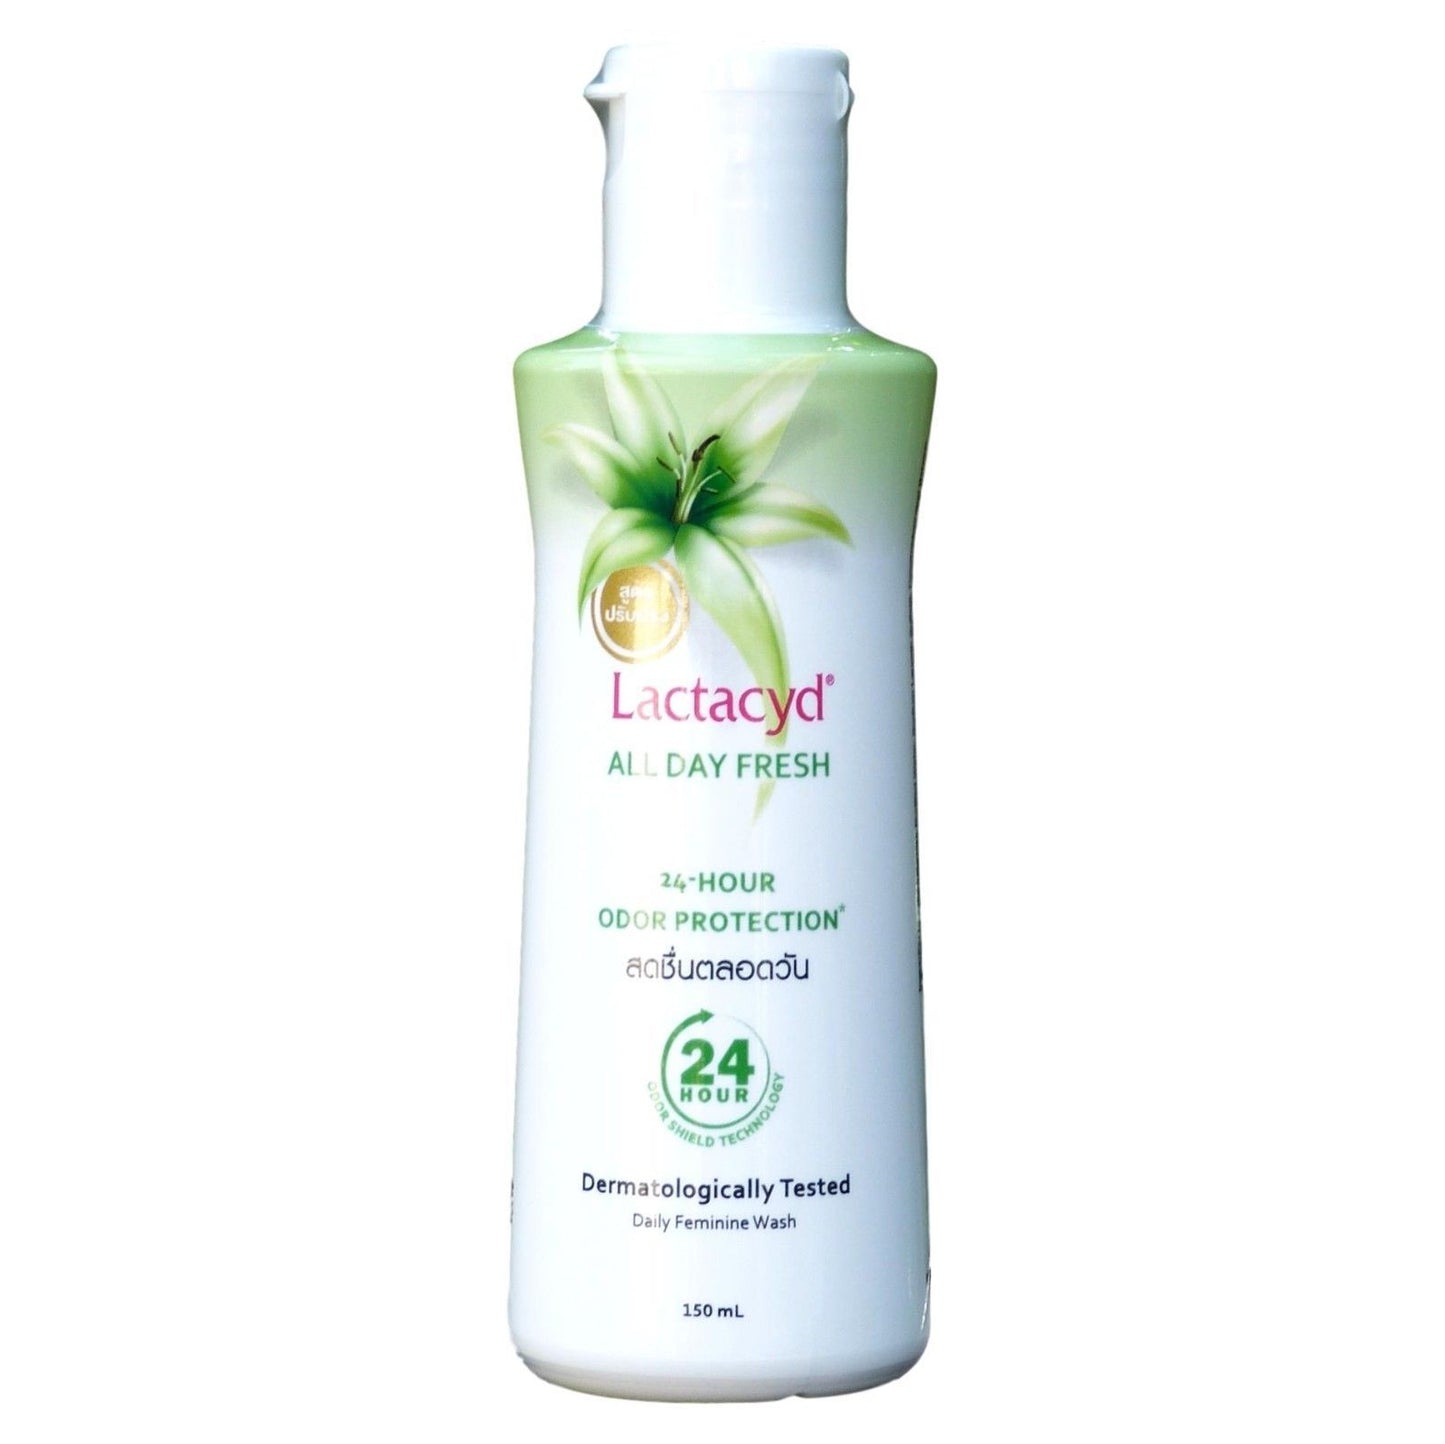 Lactacyd All Day Fresh Daily Feminine Wash with Odor Protection 150ml - Asian Beauty Supply